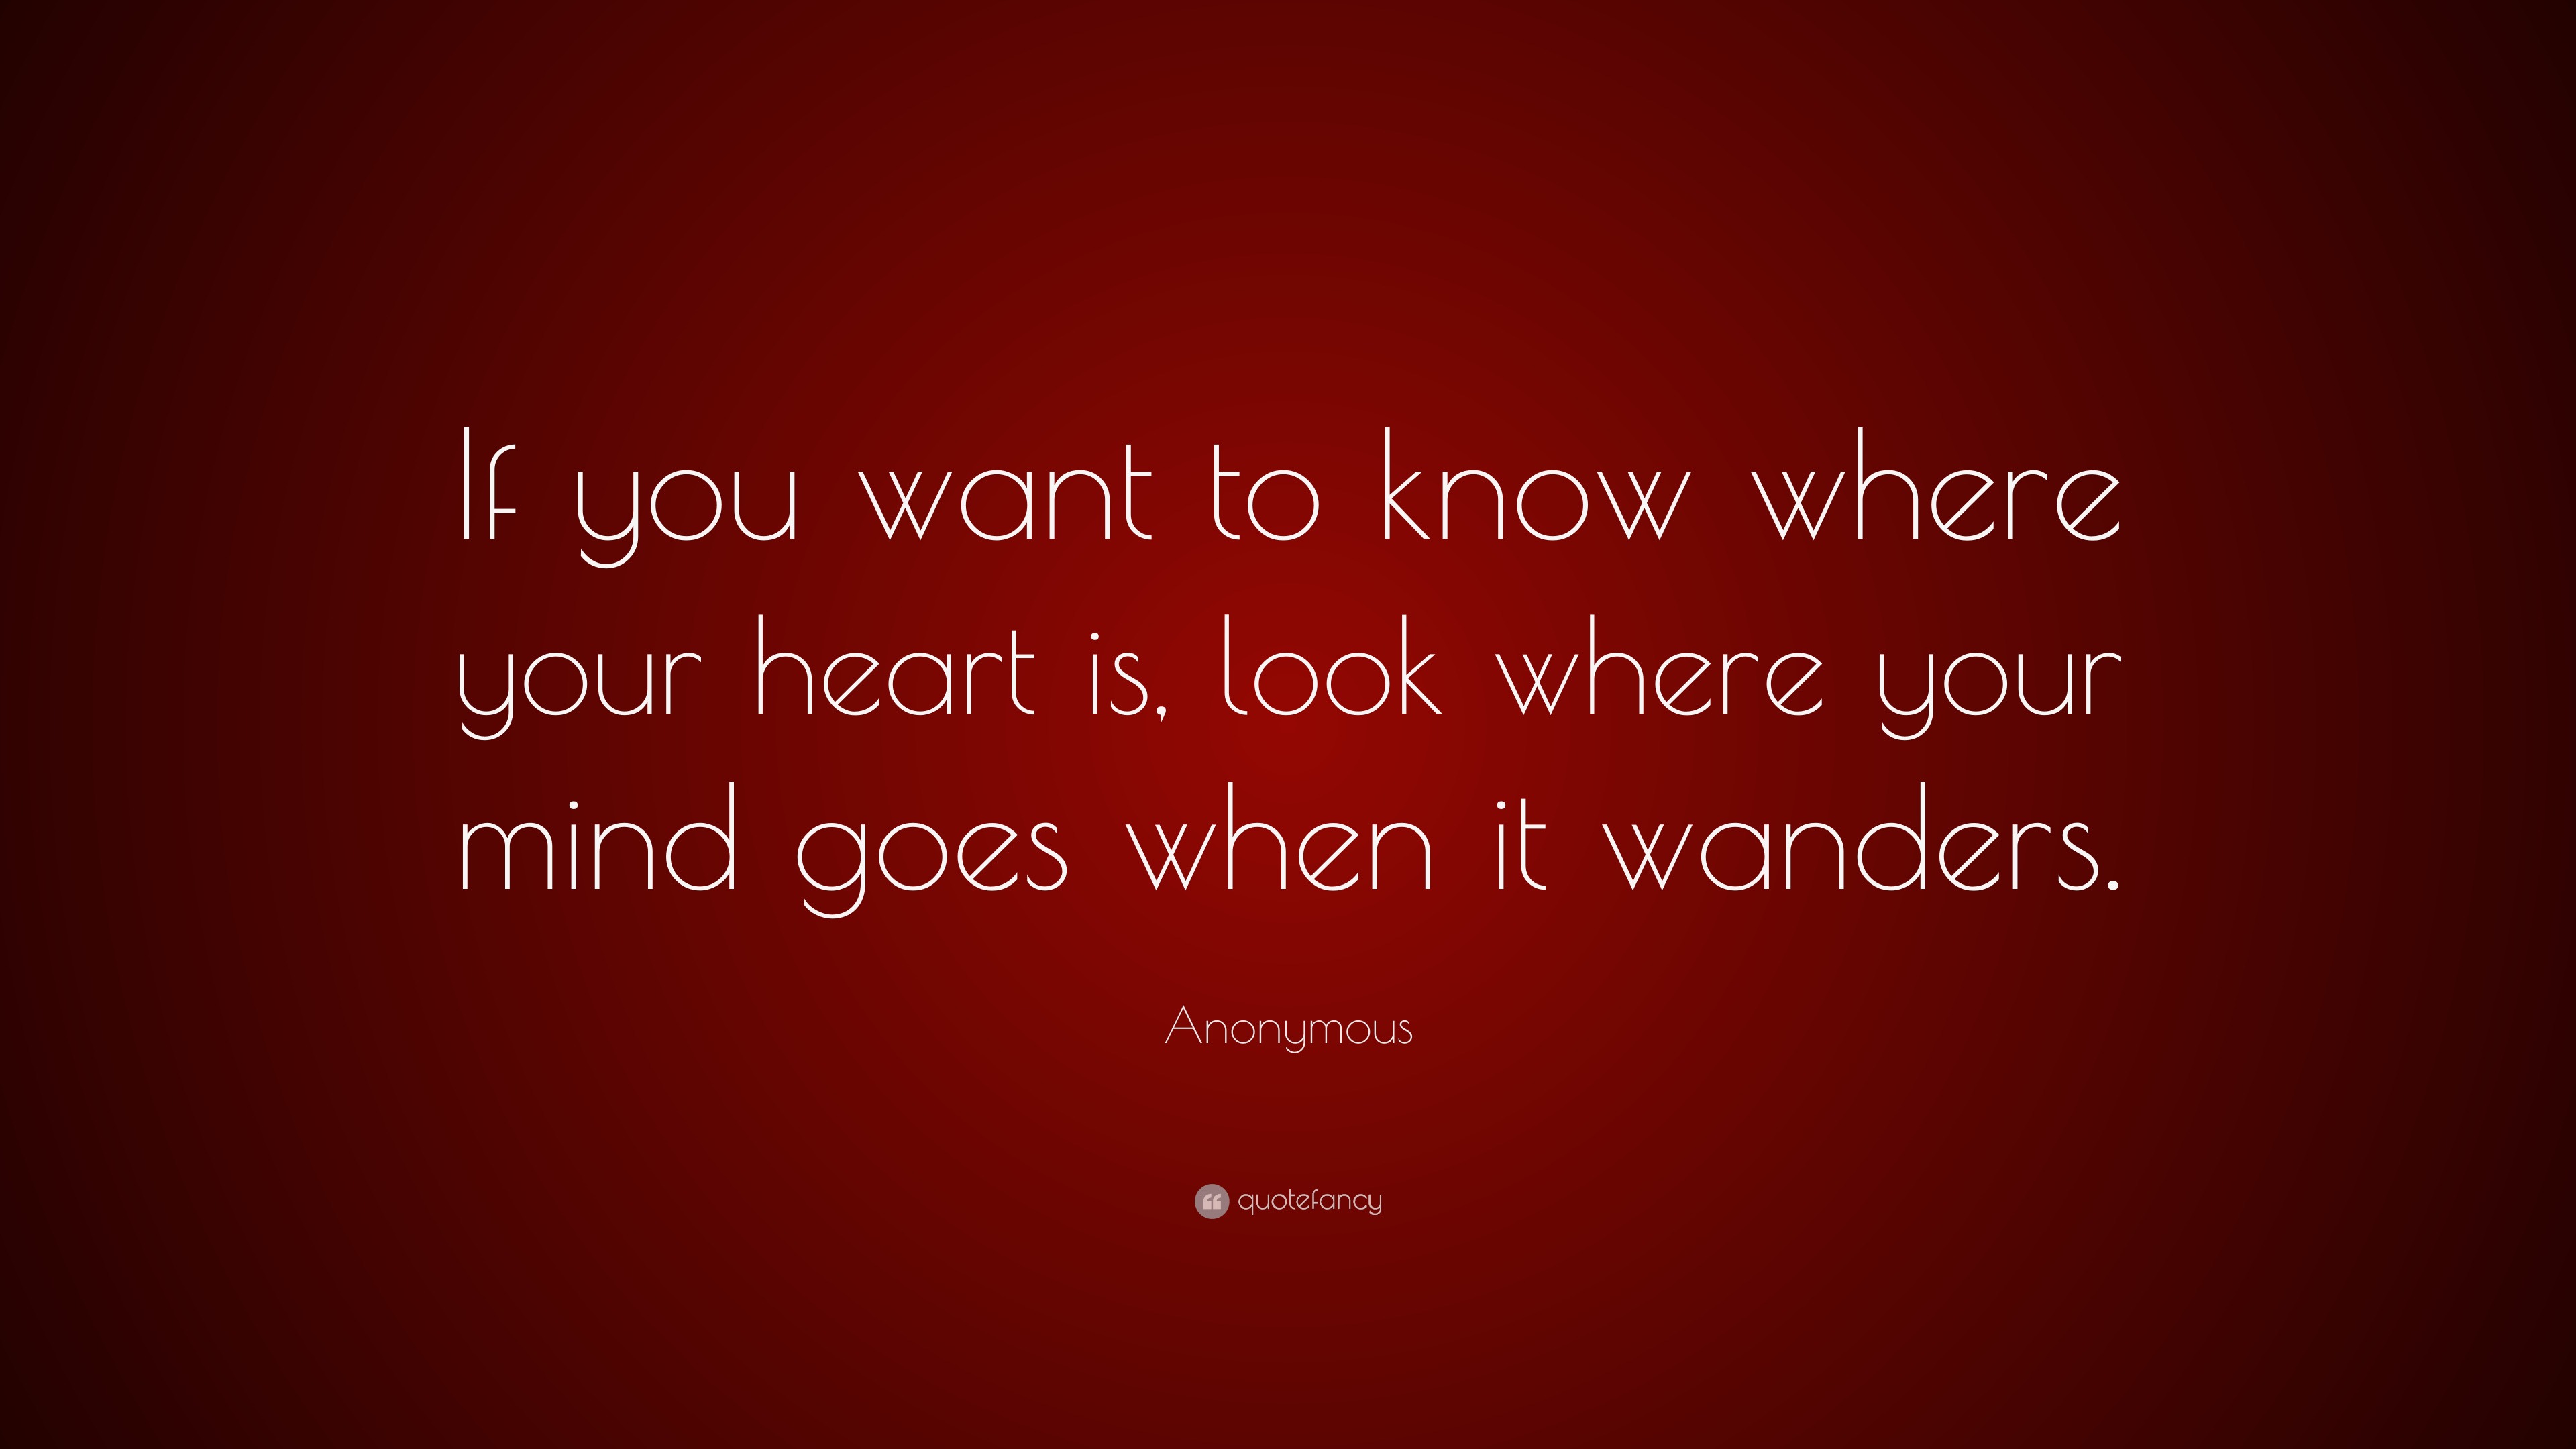 Anonymous Quote: “If You Want To Know Where Your Heart Is, Look Where Your Mind Goes